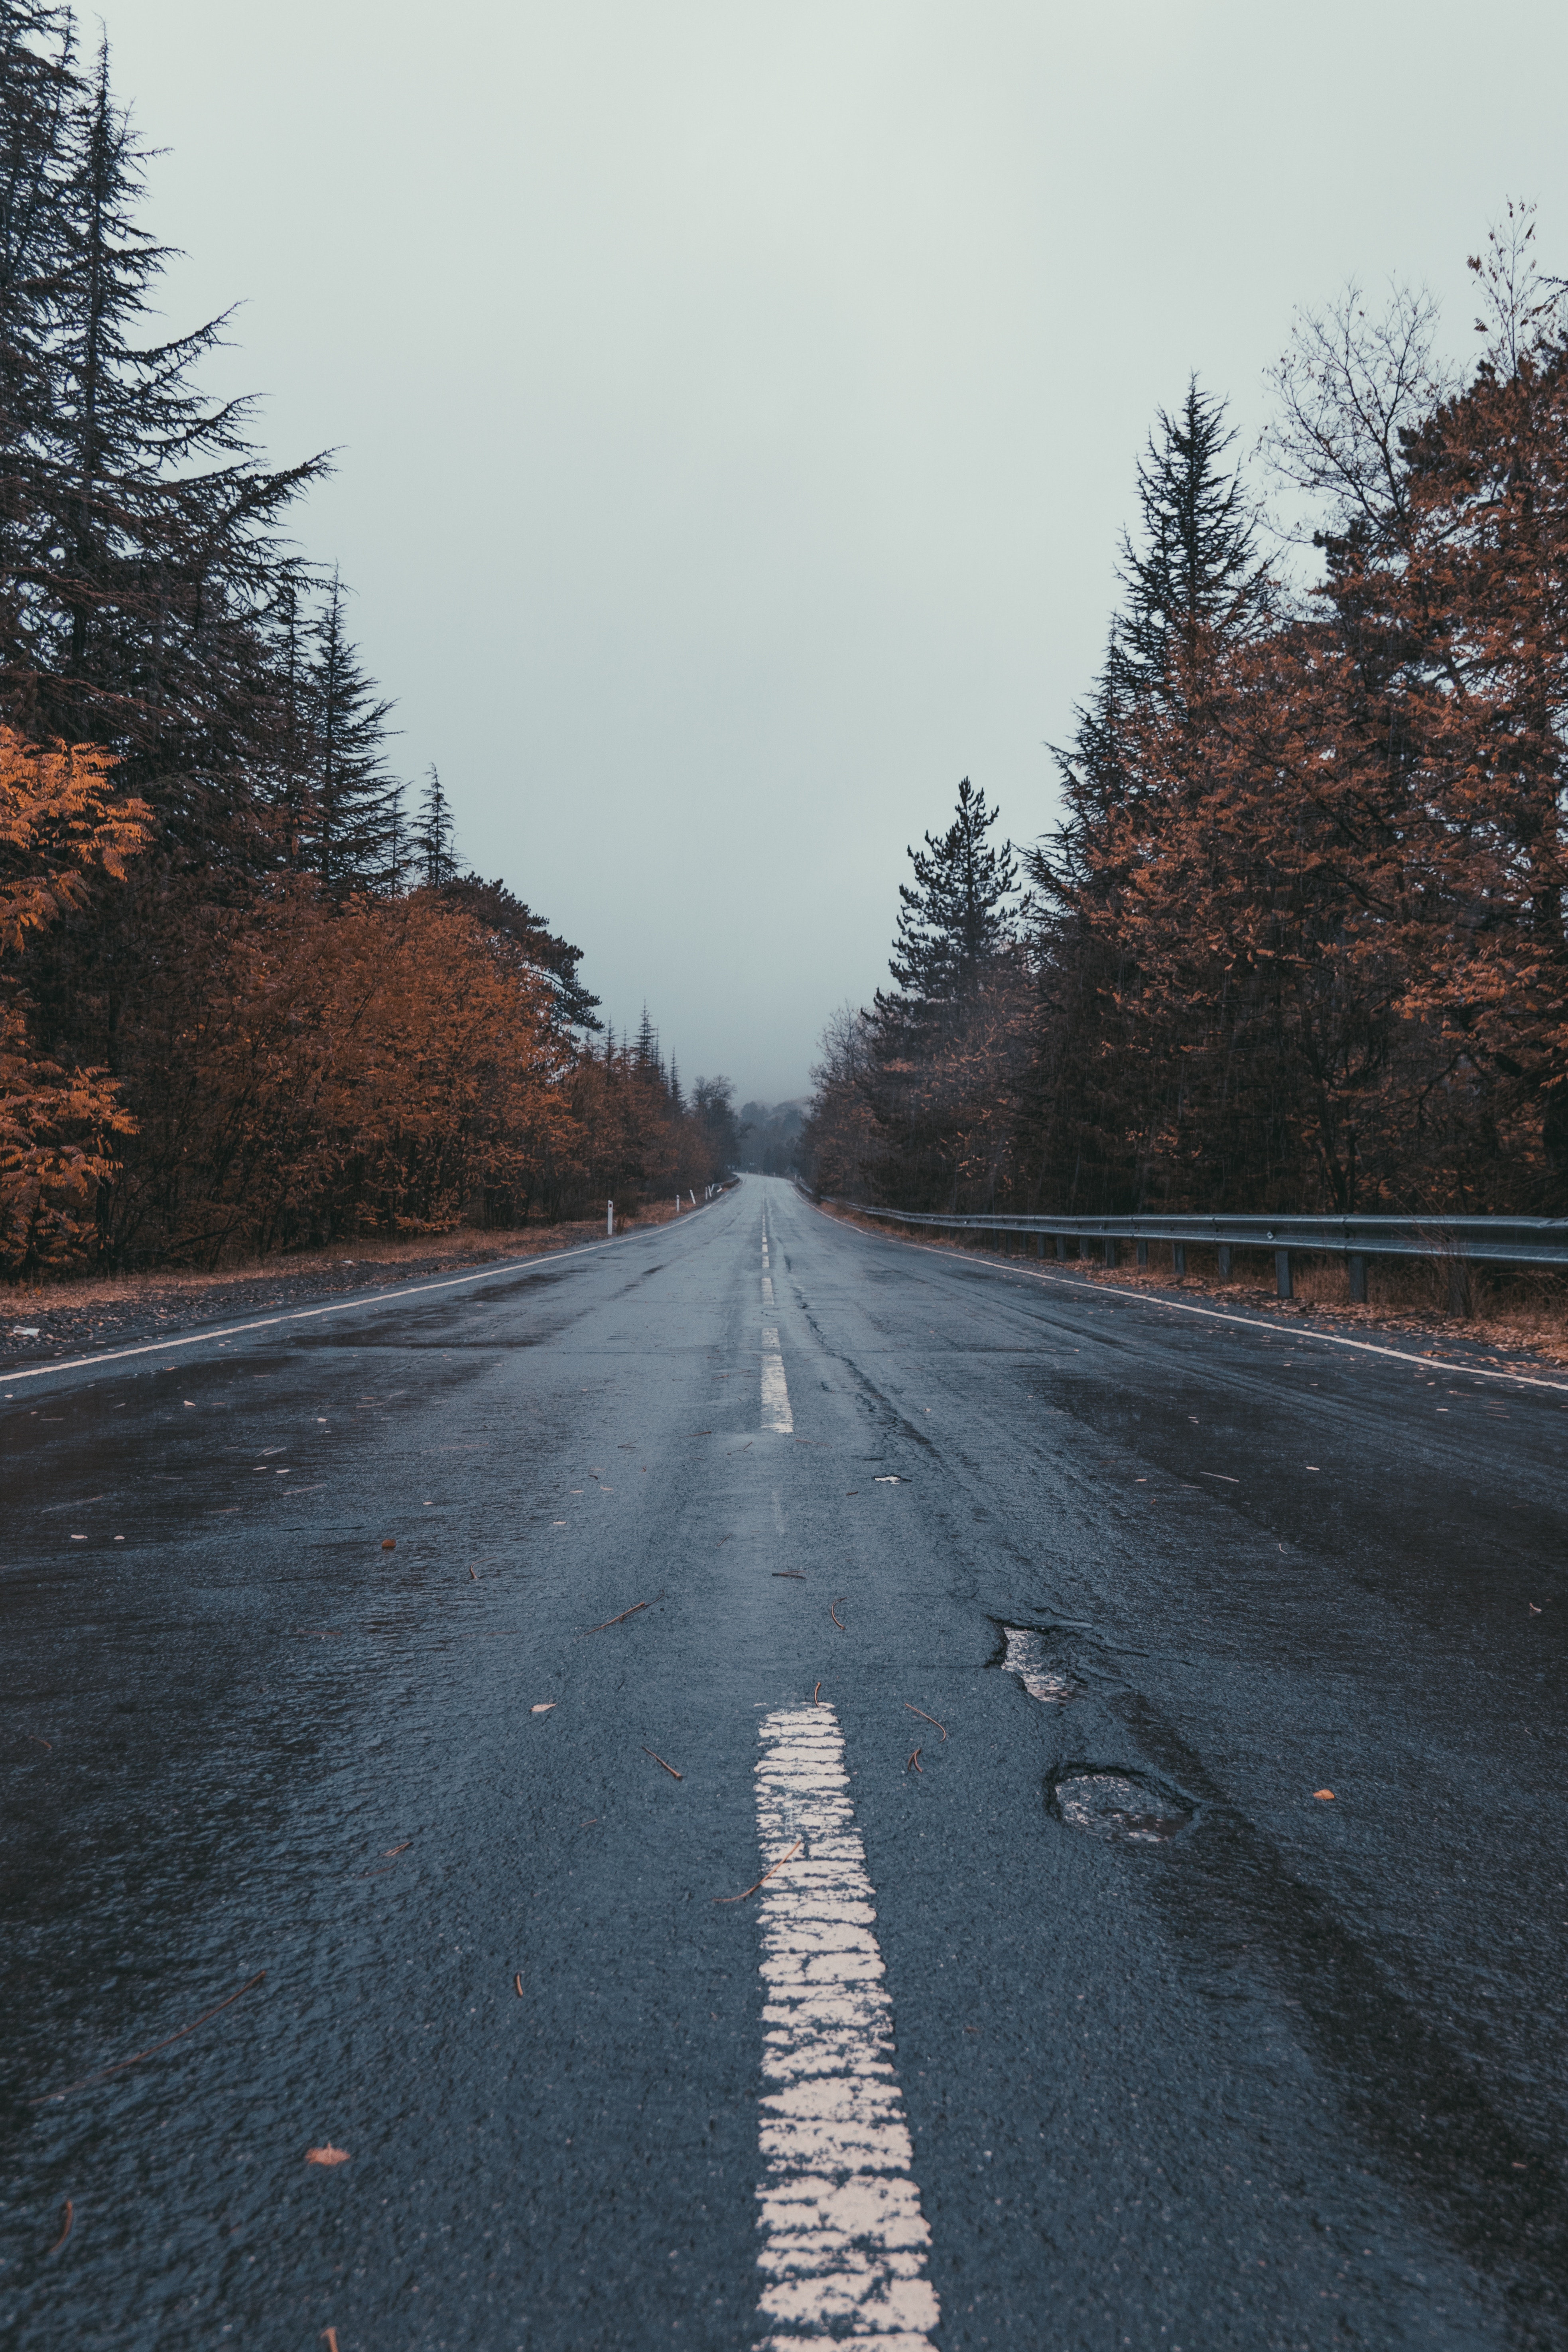 mainly cloudy, nature, trees, road, markup, overcast Full HD